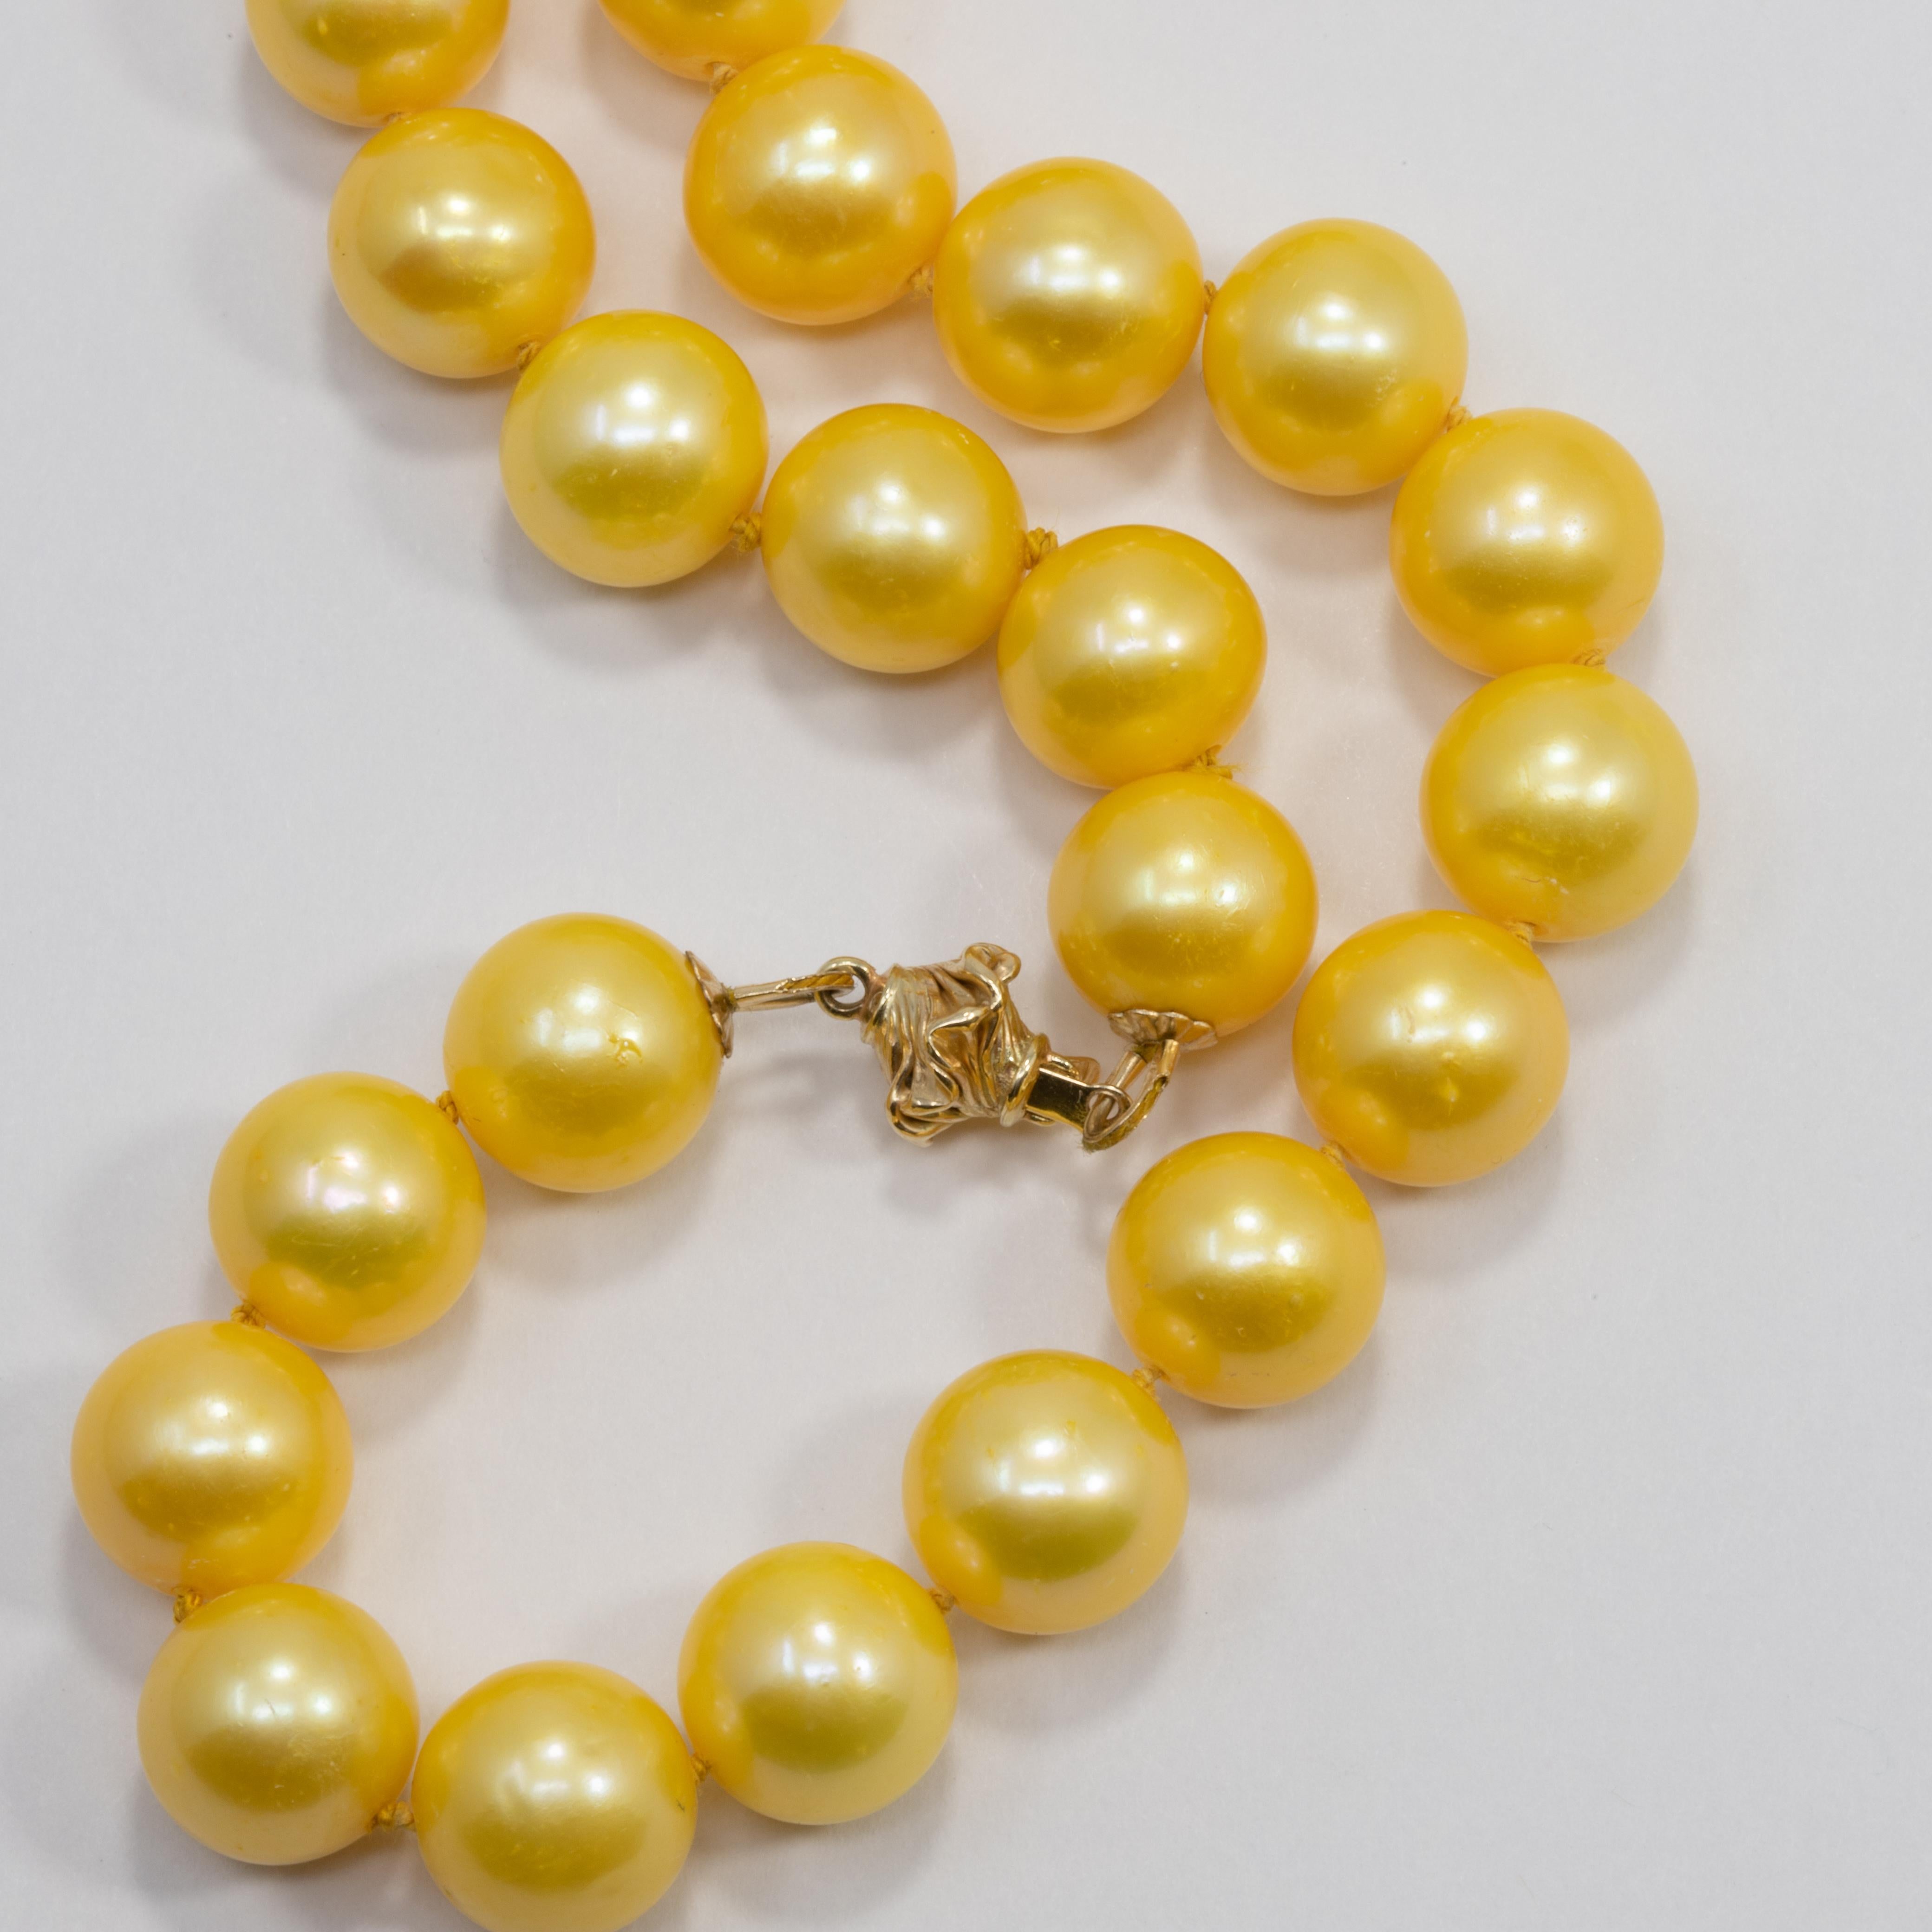 Genuine South Sea Pearl Bead Knotted String Necklace with 14 Karat Yellow Gold In Excellent Condition For Sale In Milford, DE